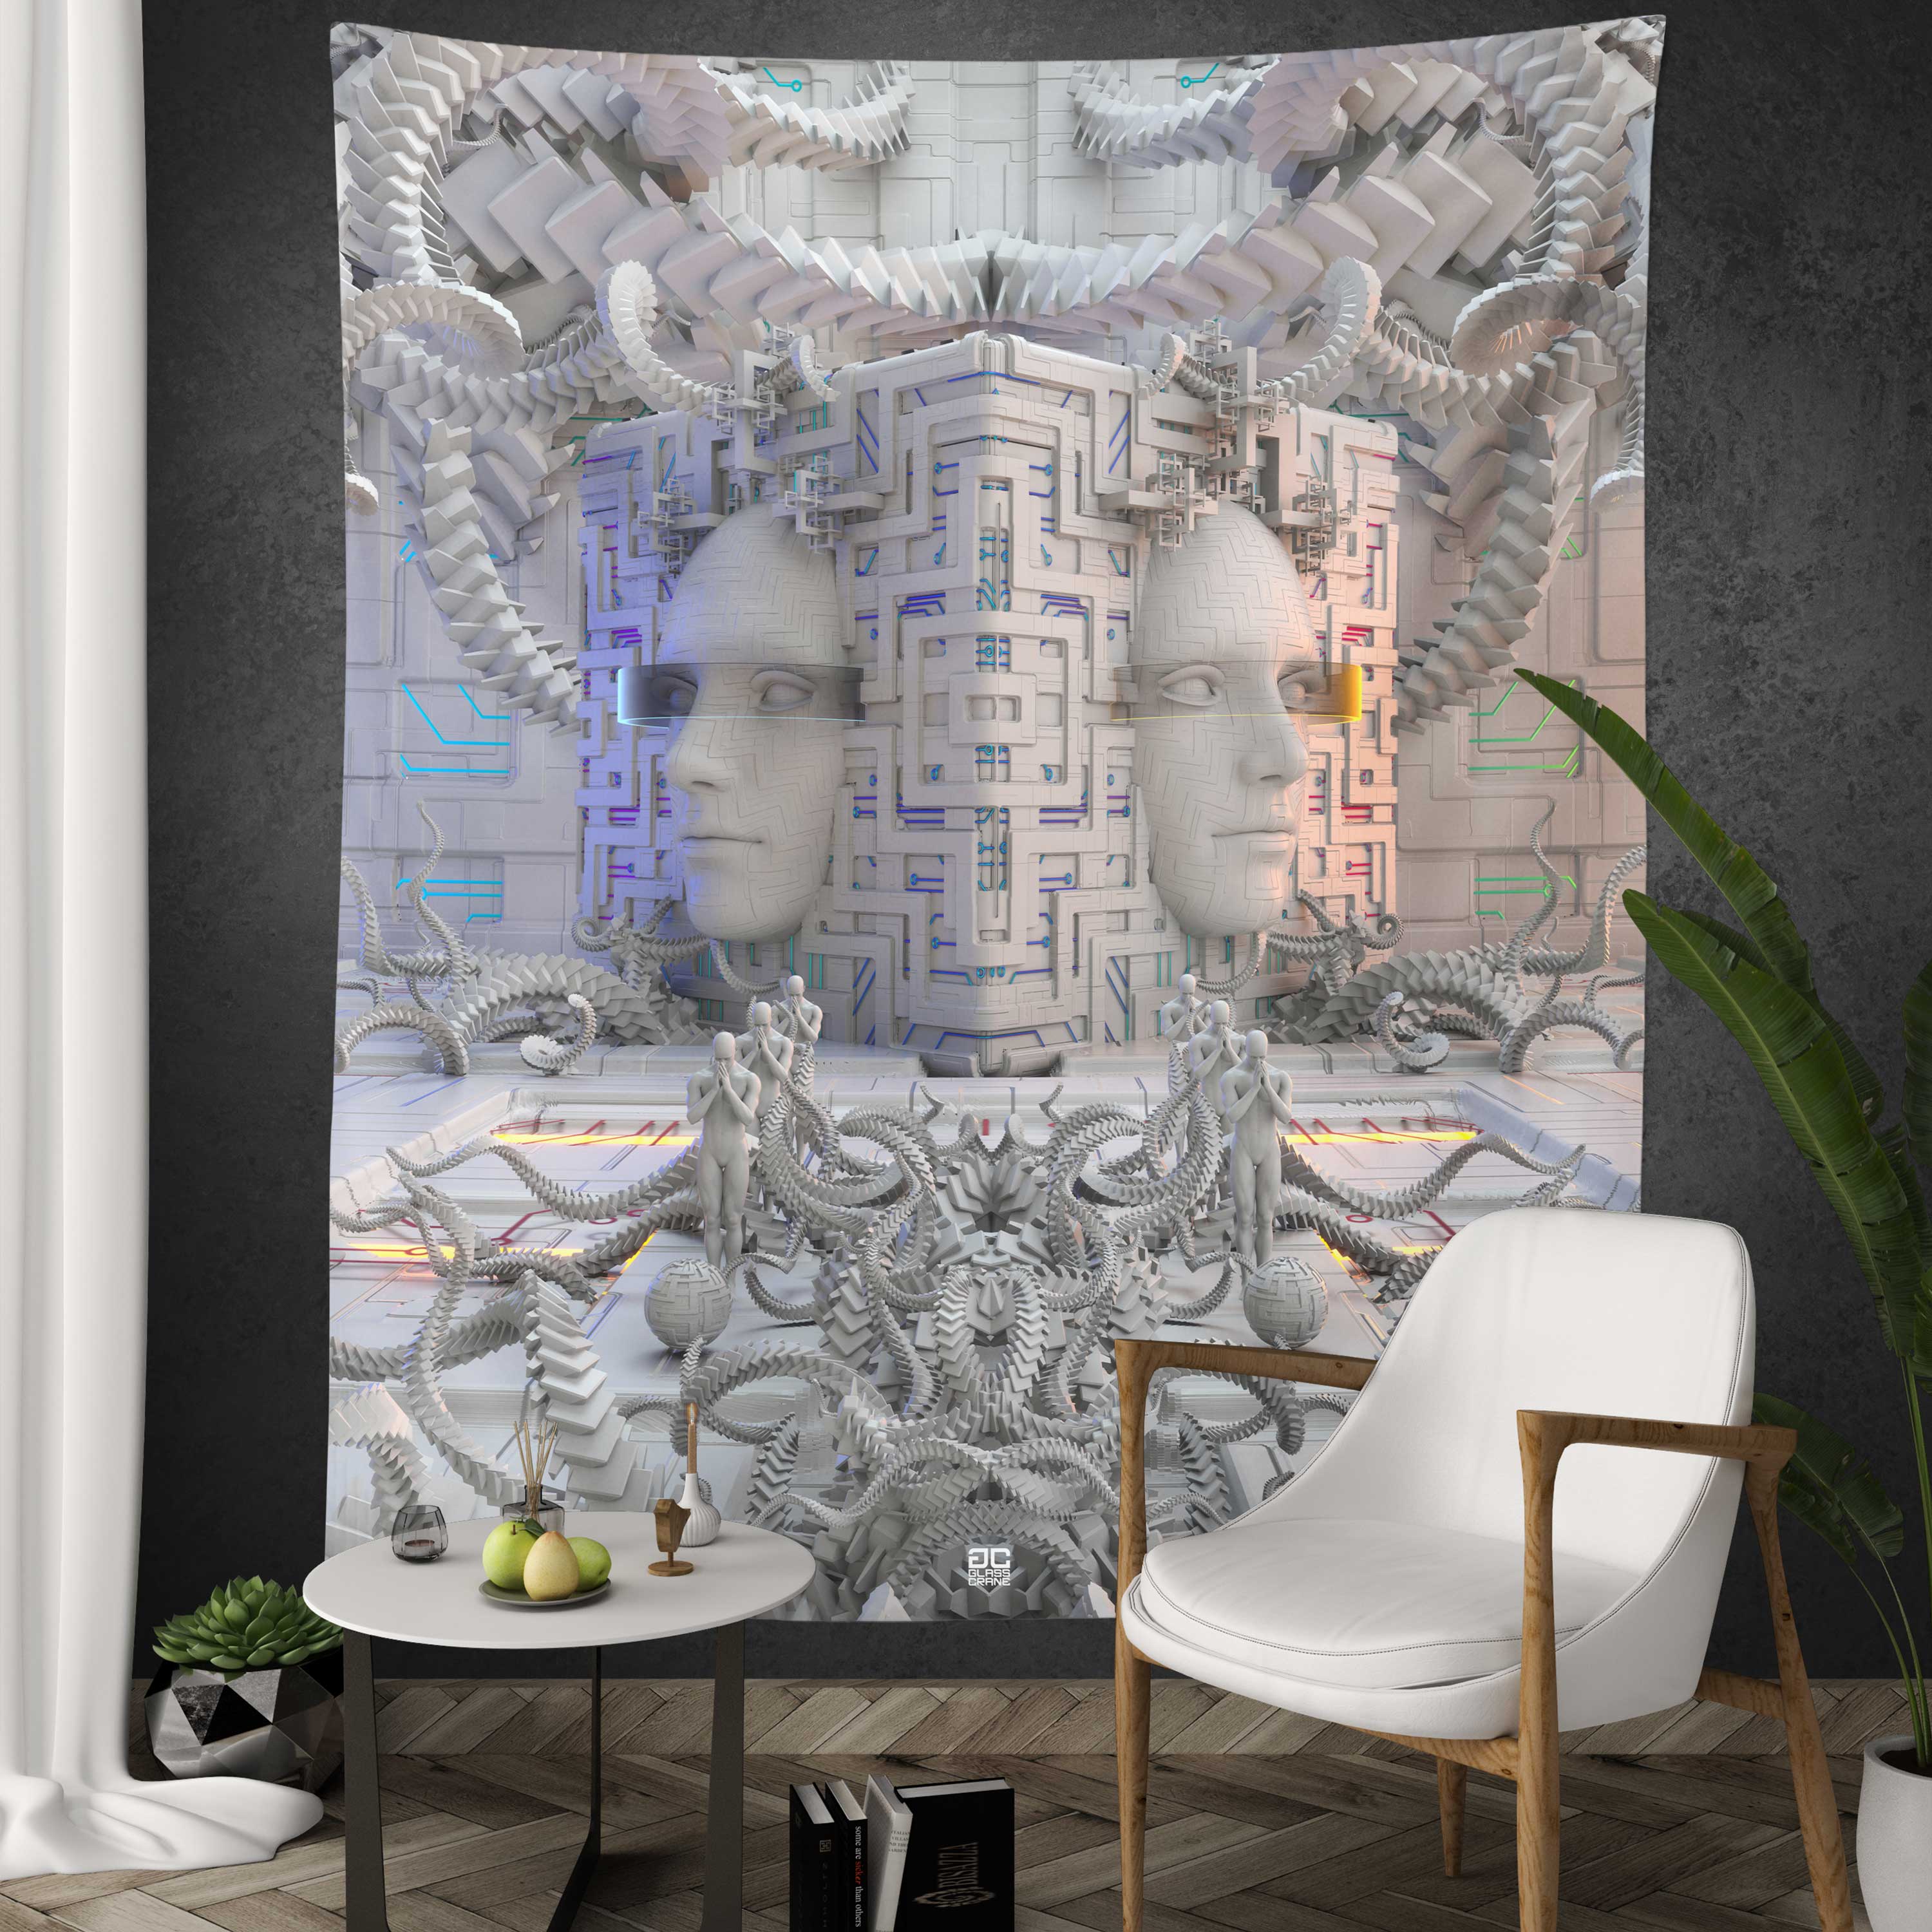 DEFENSE NODE • GLASS CRANE • Wall Tapestry Tapestry 